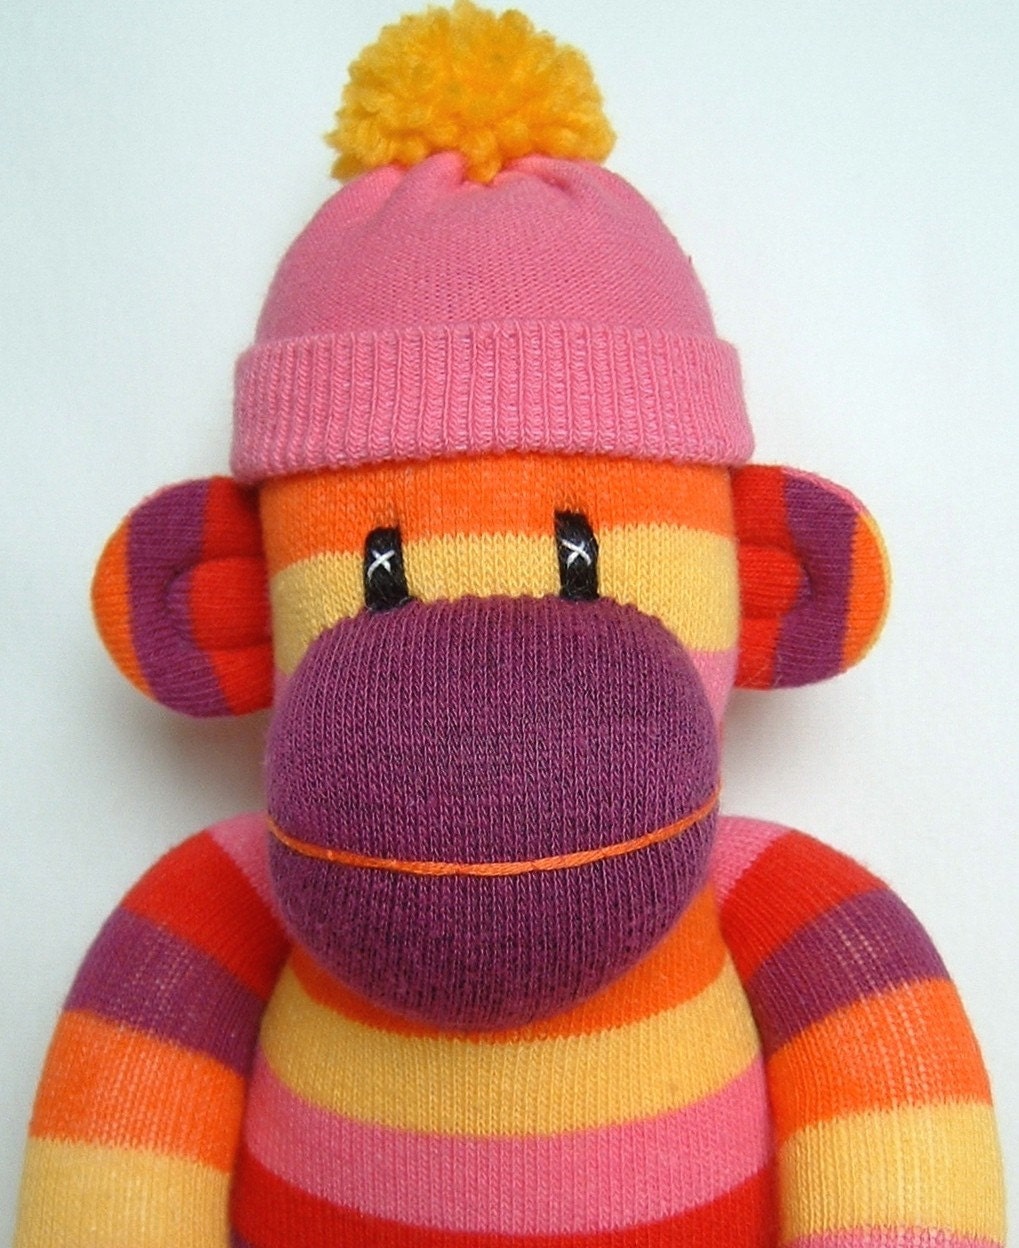 Groovy Girl Striped Sock Monkey made to order